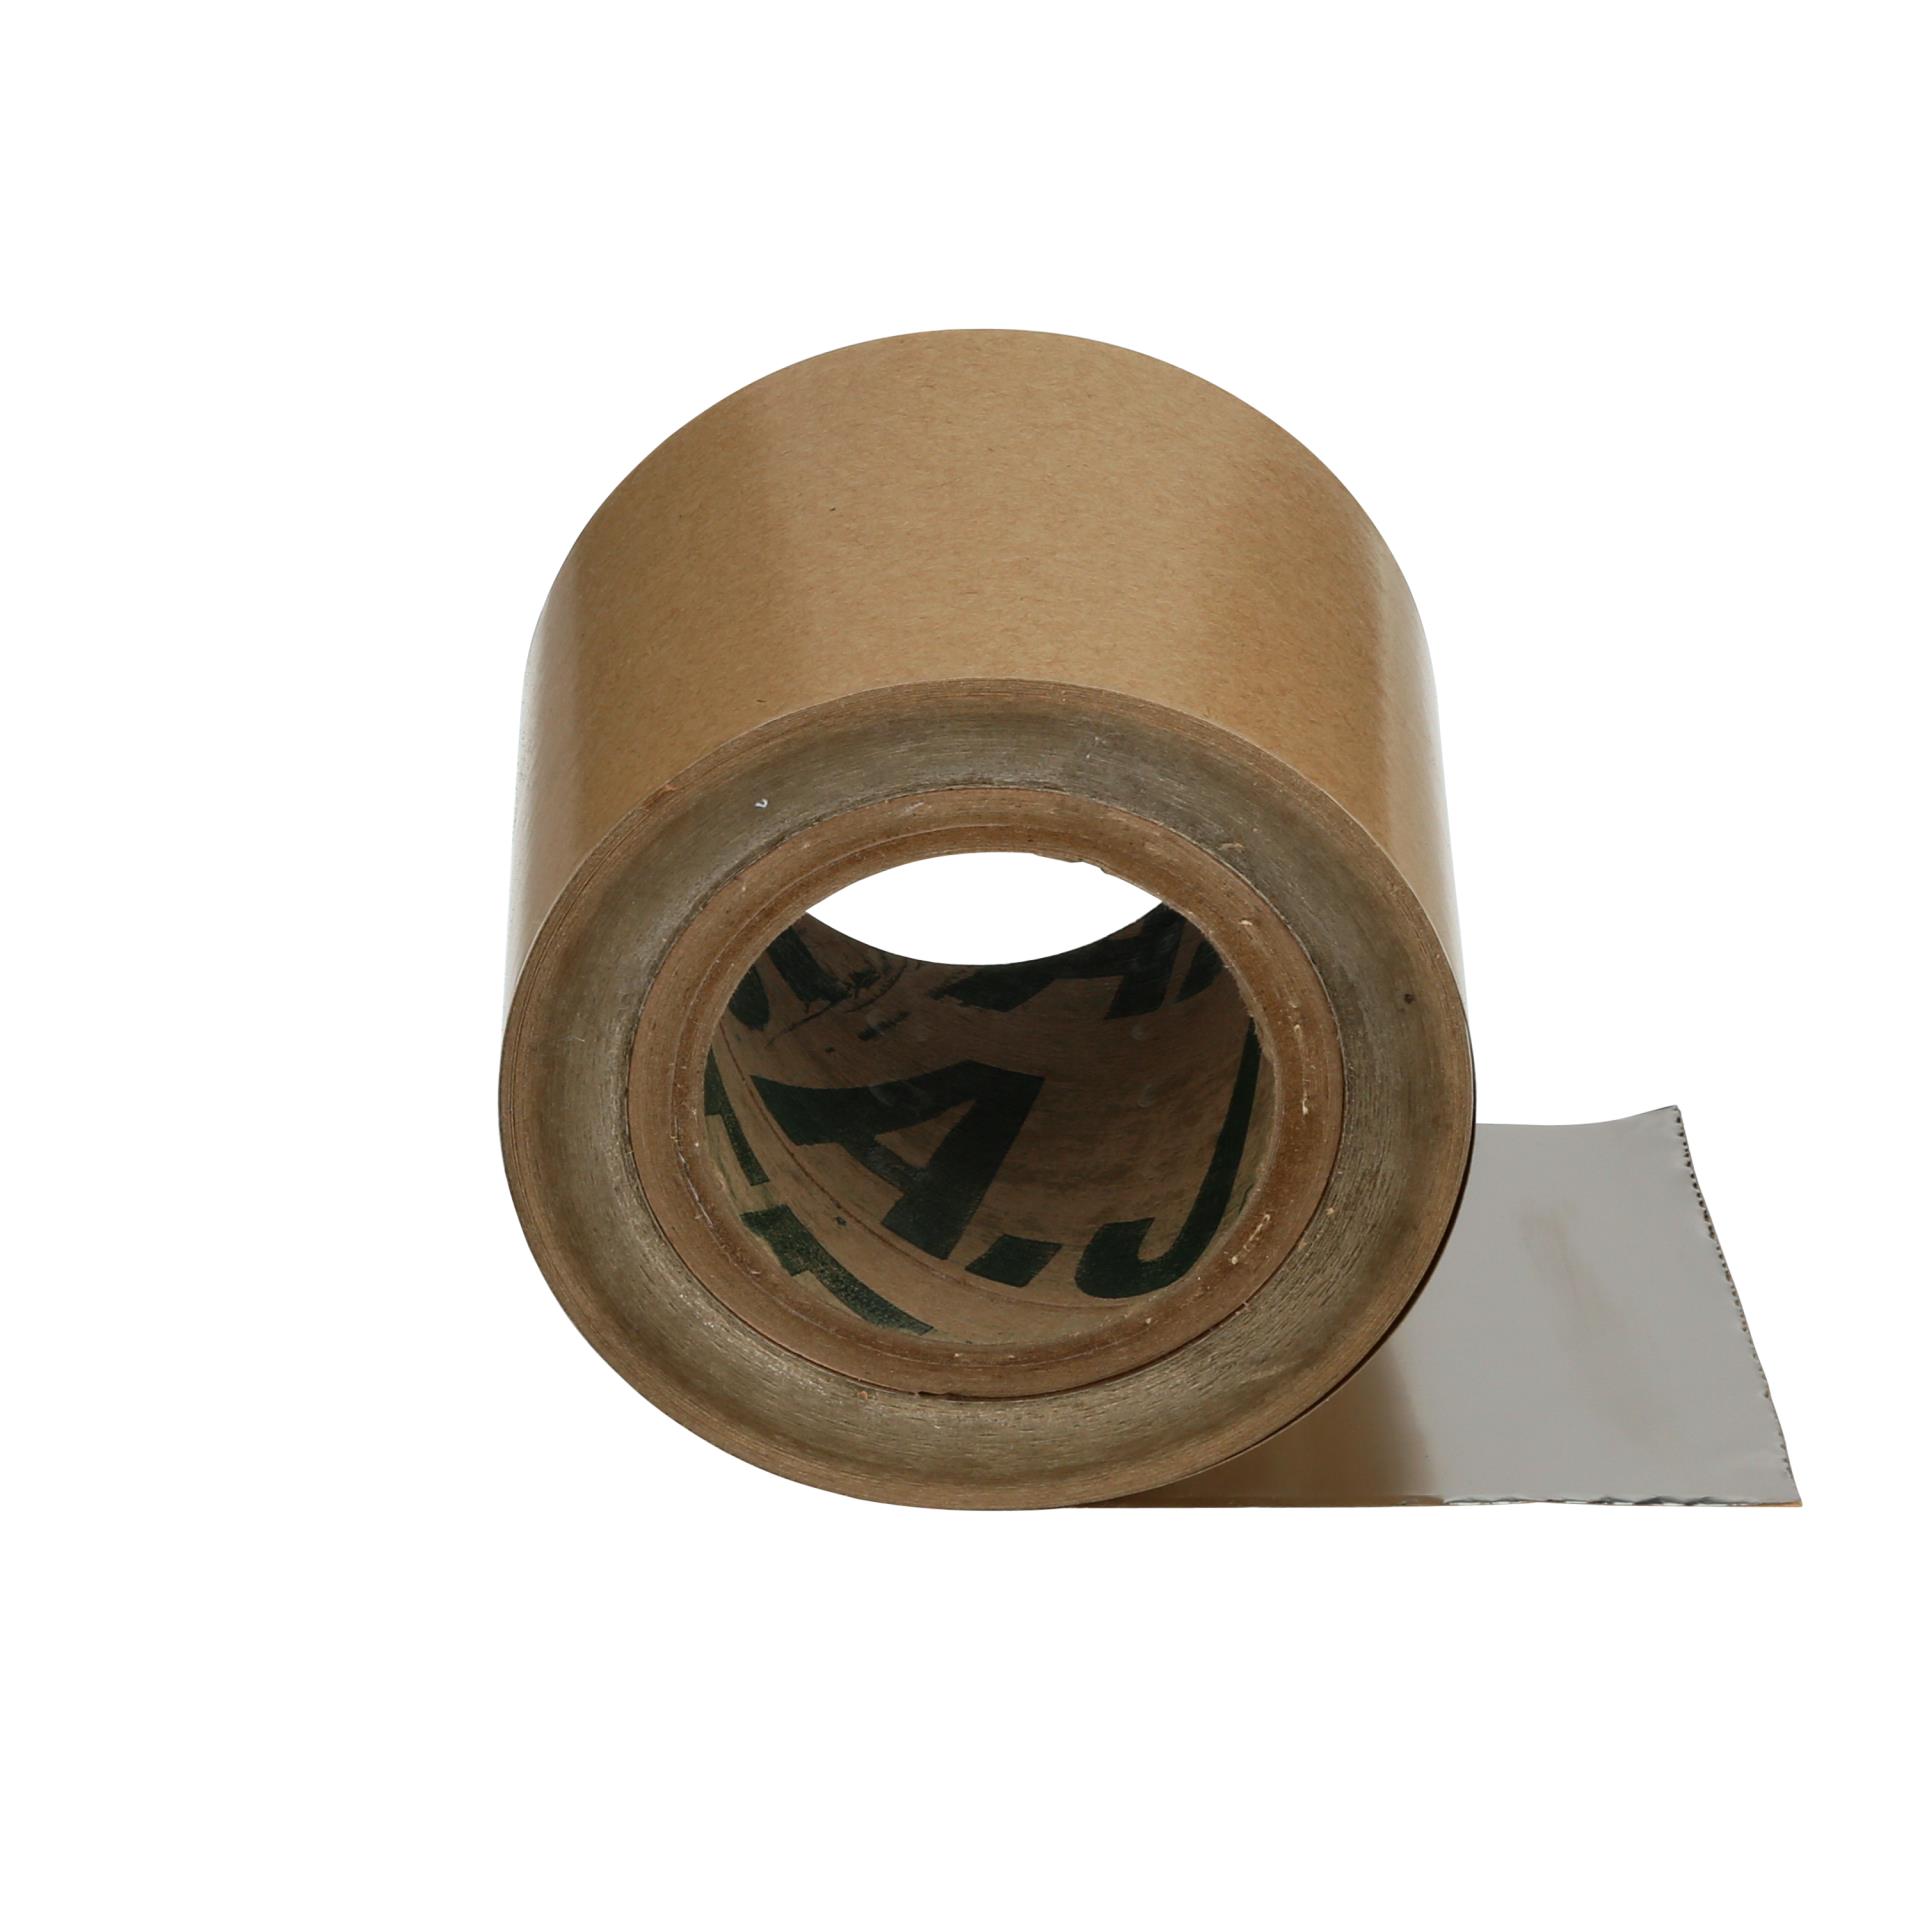 96 ROLLS OF EXTRA WIDE 3" BROWN PACKING TAPE 72mm x 66M 